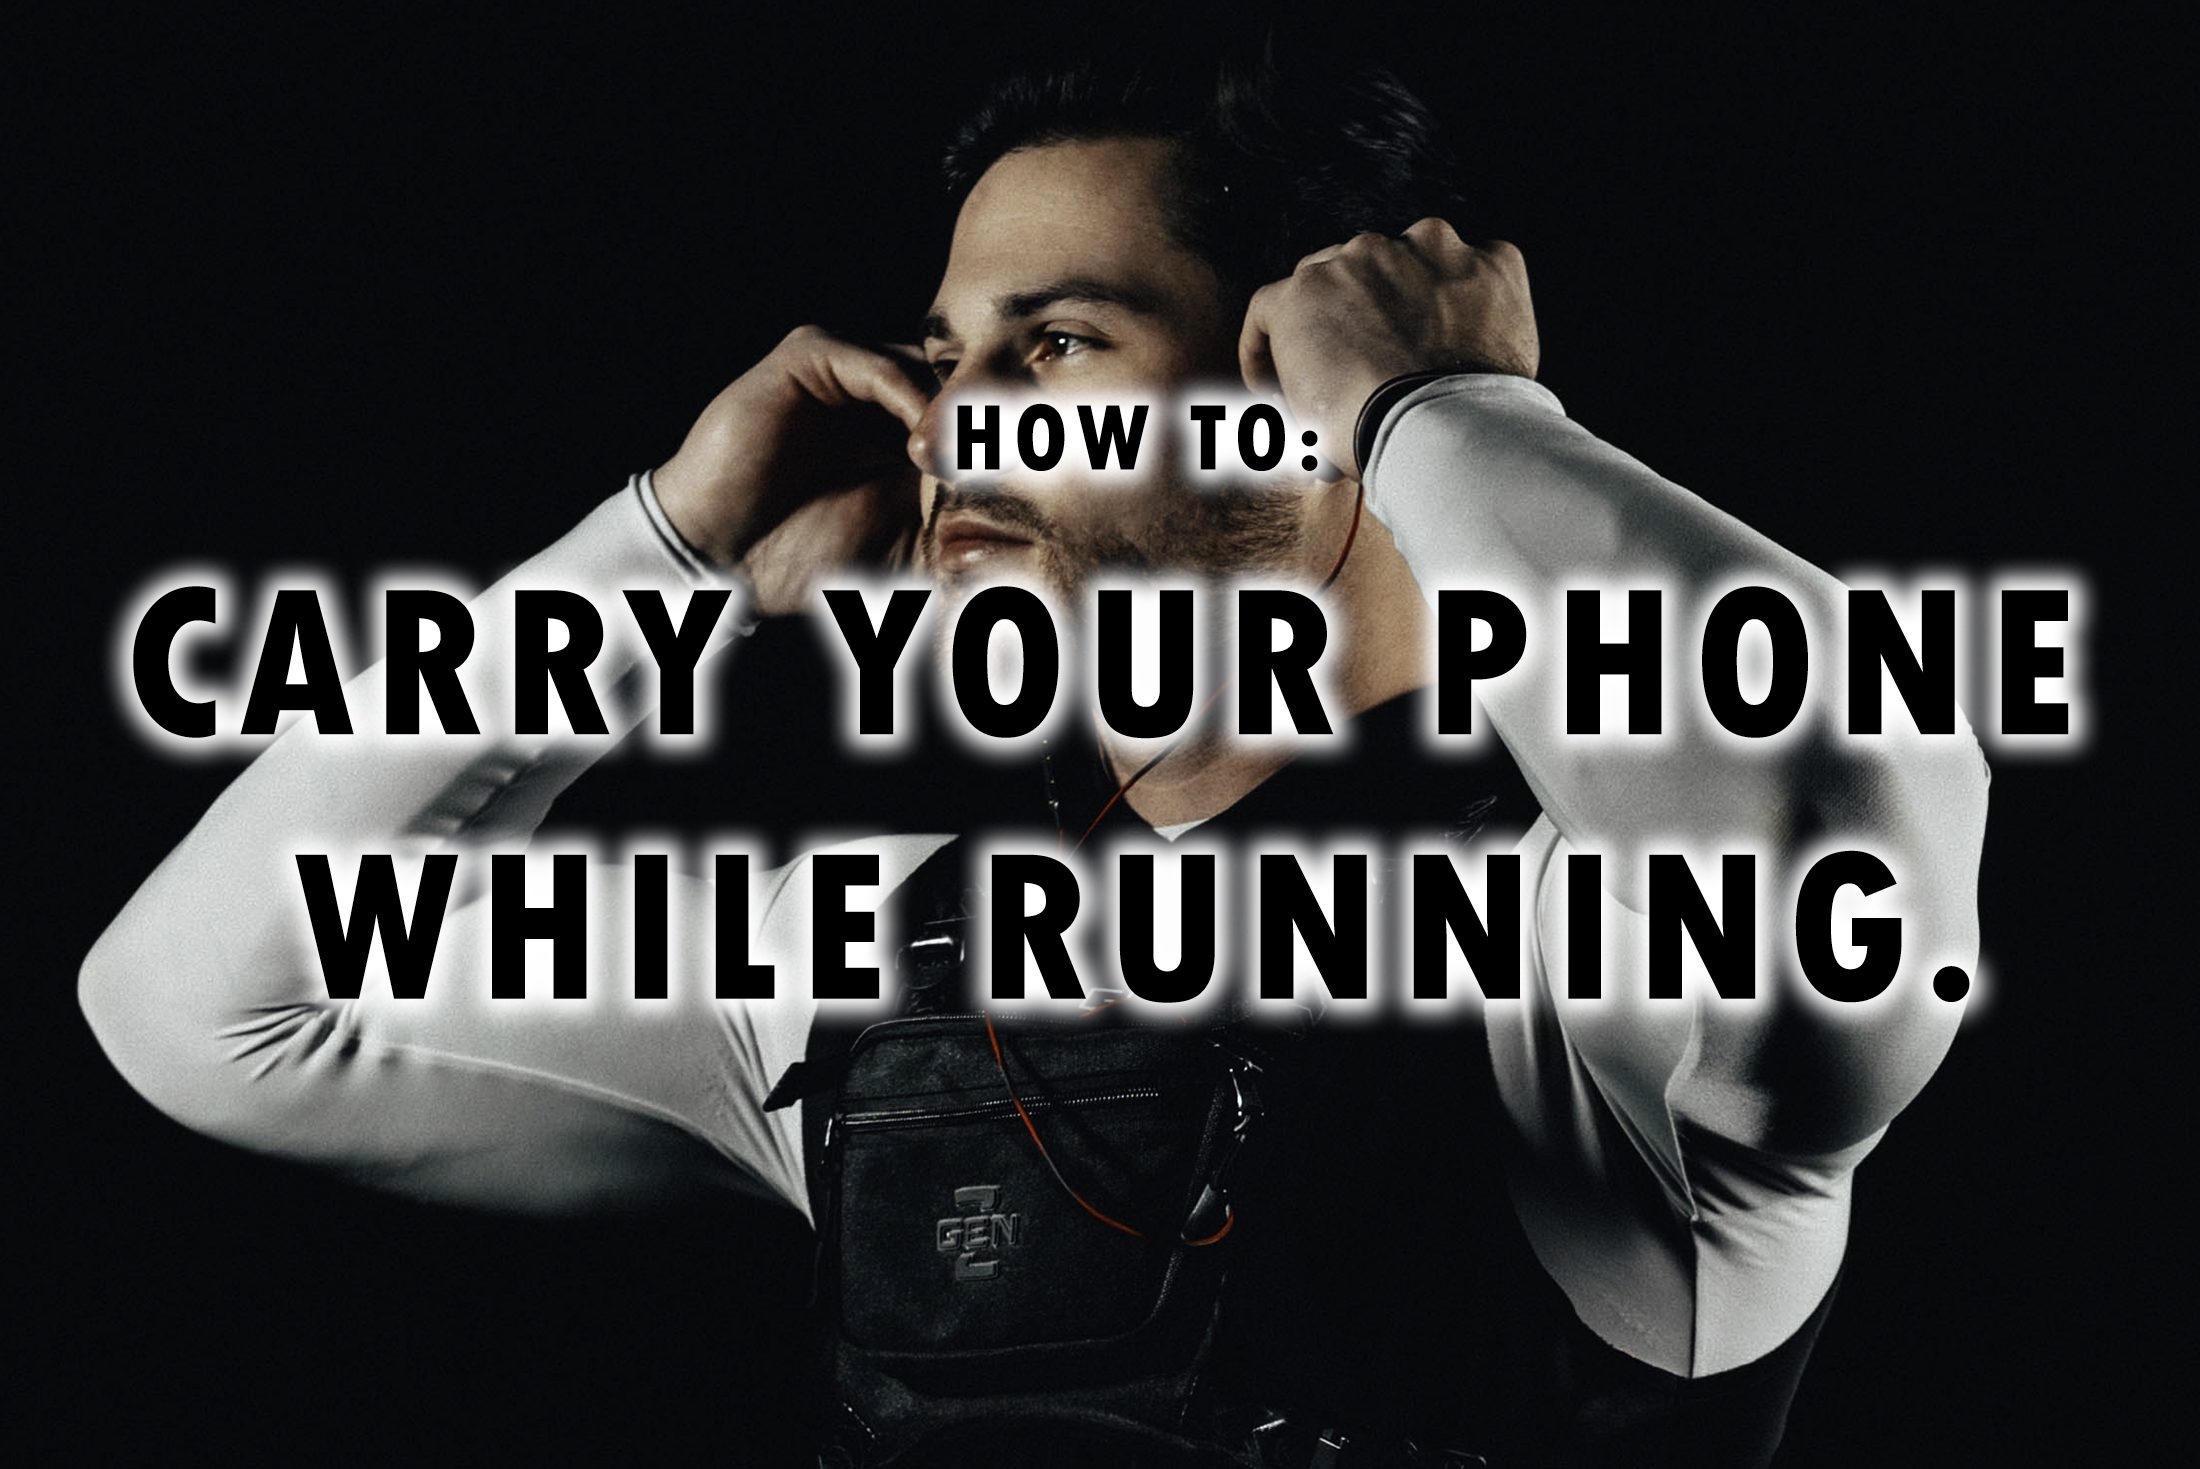 HOW TO CARRY YOUR PHONE WHILE RUNNING